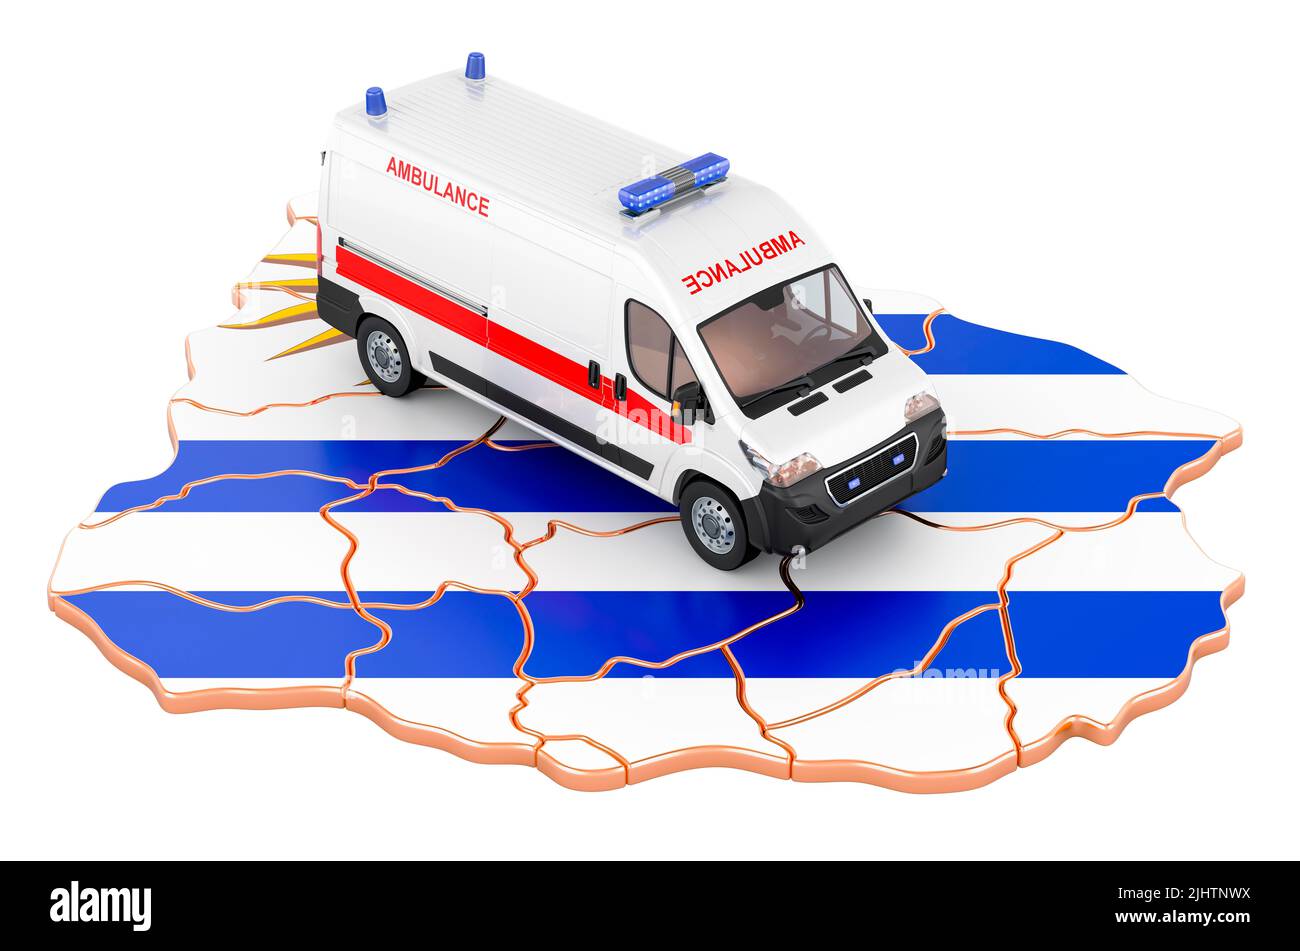 Emergency medical services in Uruguay. Ambulance van on the Uruguayan map. 3D rendering isolated on white background Stock Photo